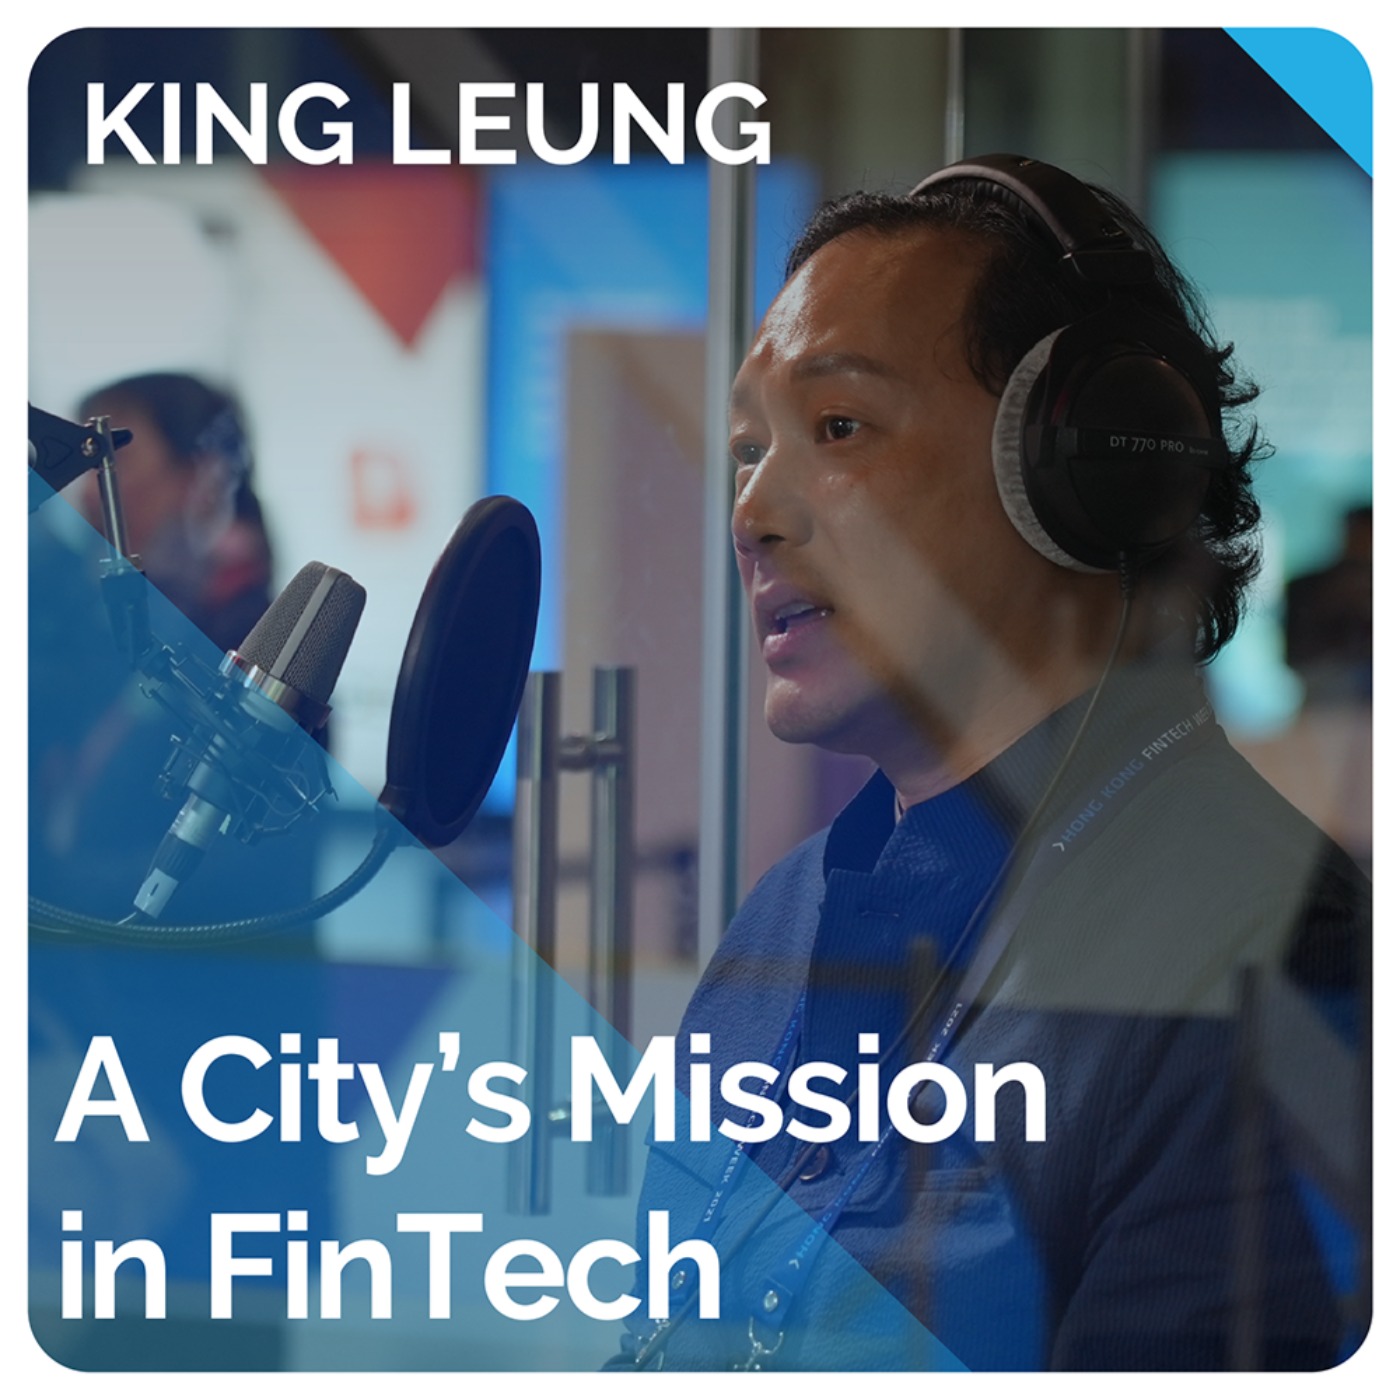 A City's Mission in FinTech (ft. King Leung)